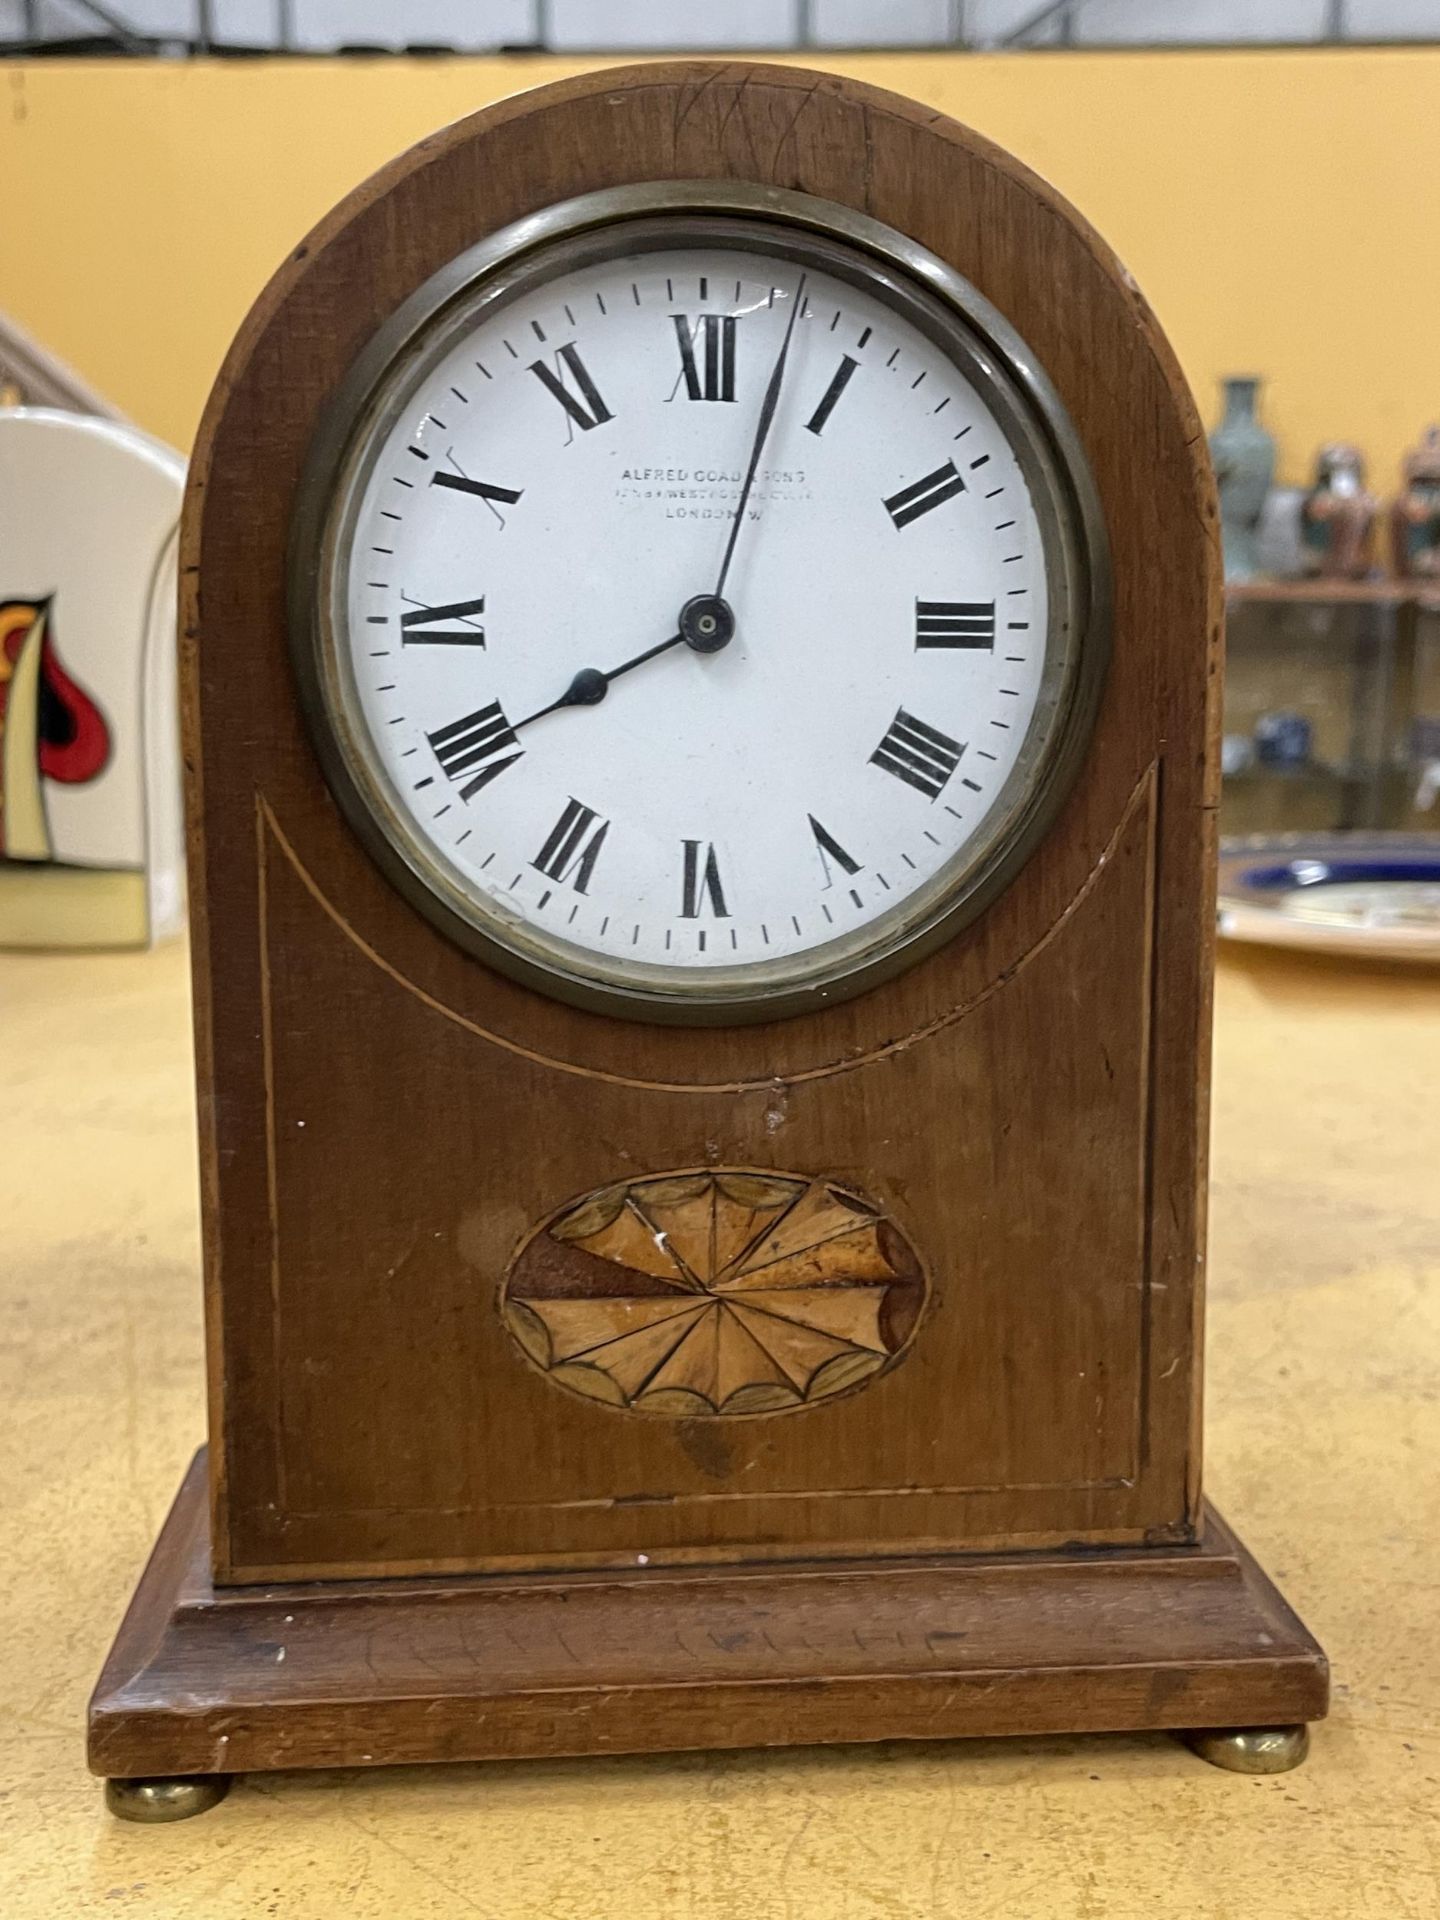 AN EDWARDIAN INLAID MAHOGANY MANTLE CLOCK BY ALFRED GOAD & SONS, LONDON